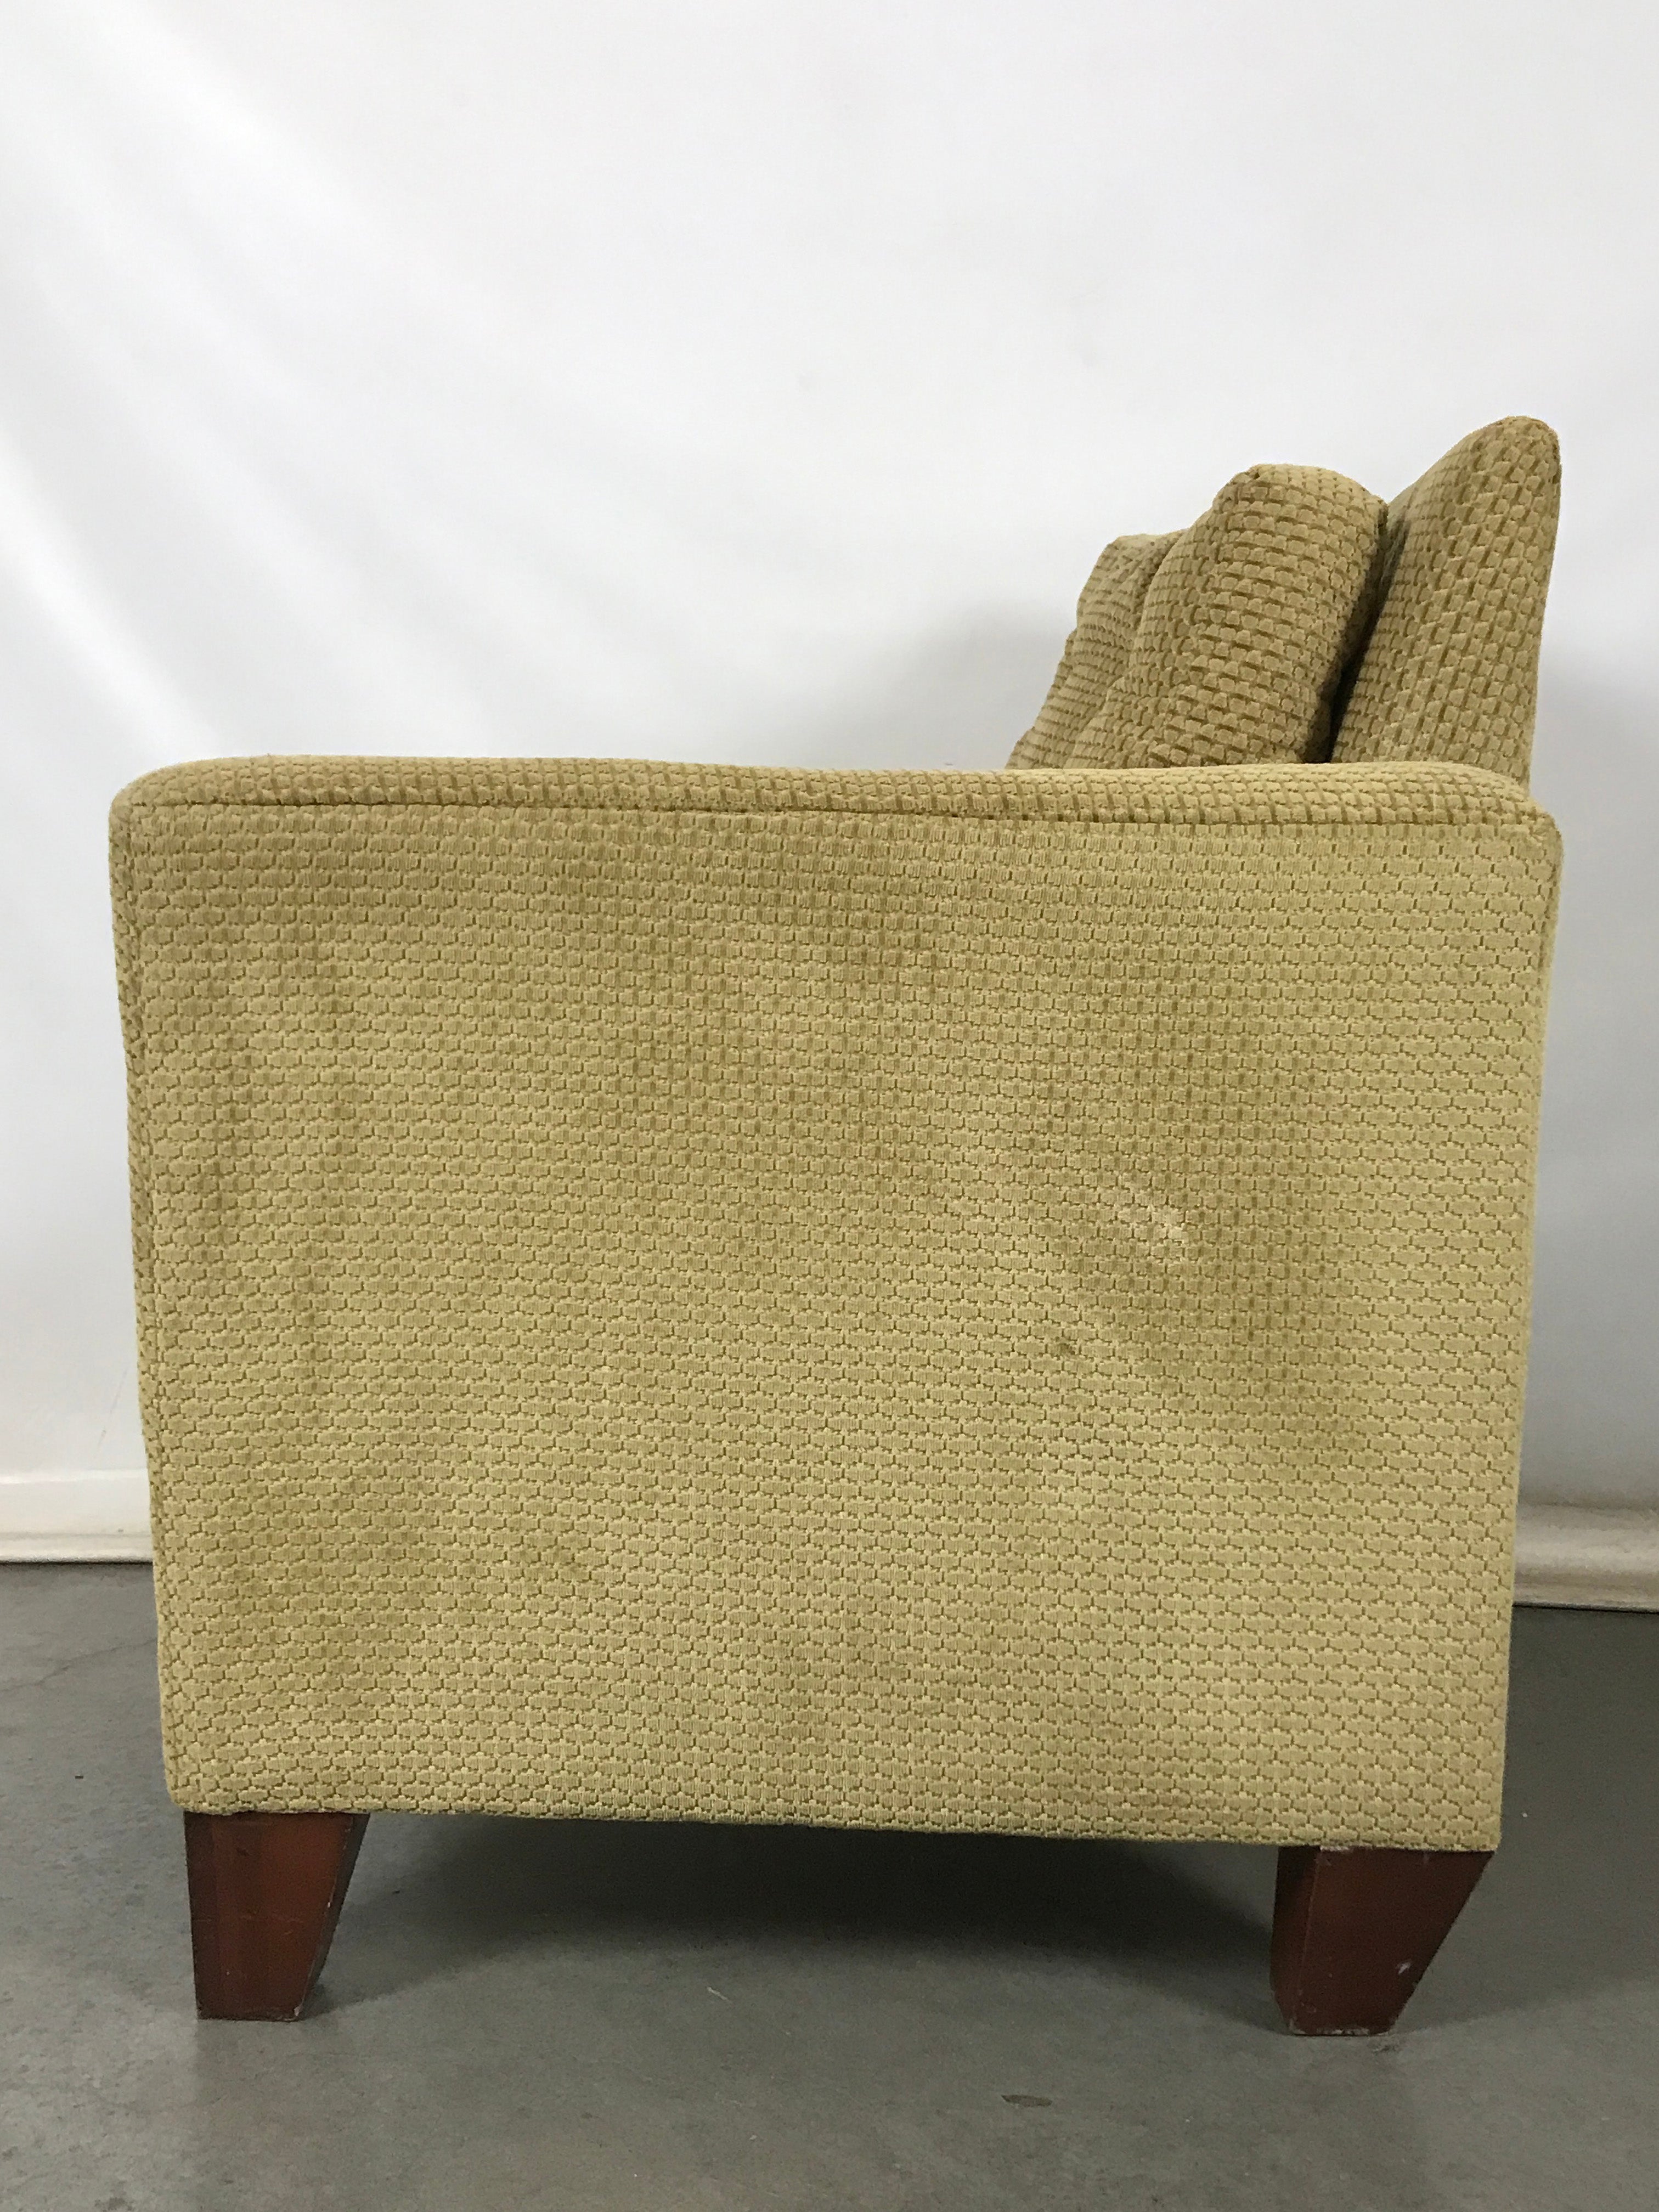 Kellex Seating Green Chair With Ottoman